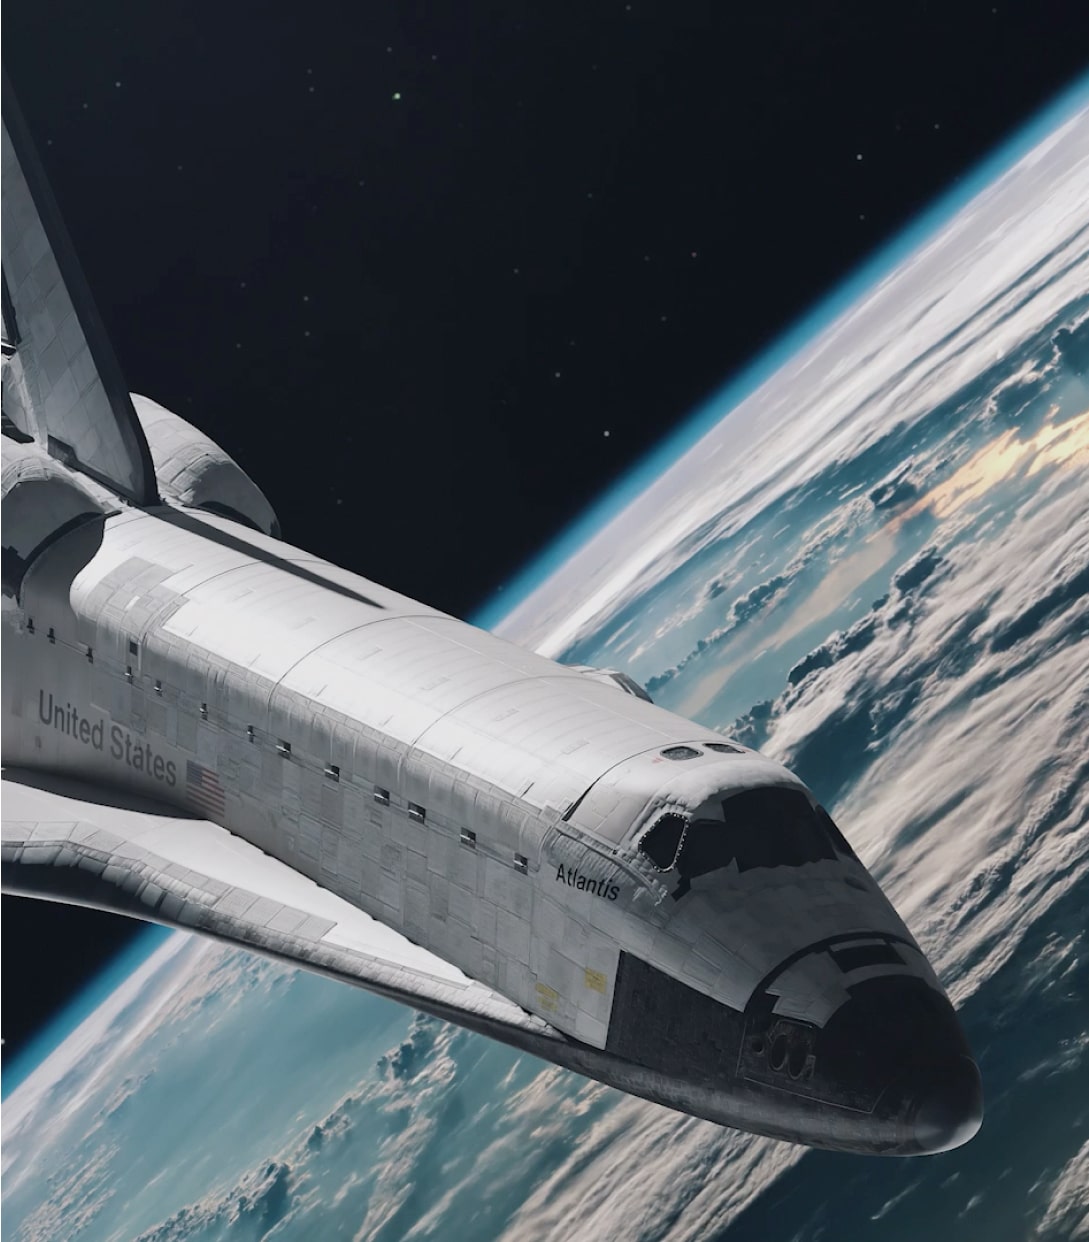 the space shuttle is flying over the earth